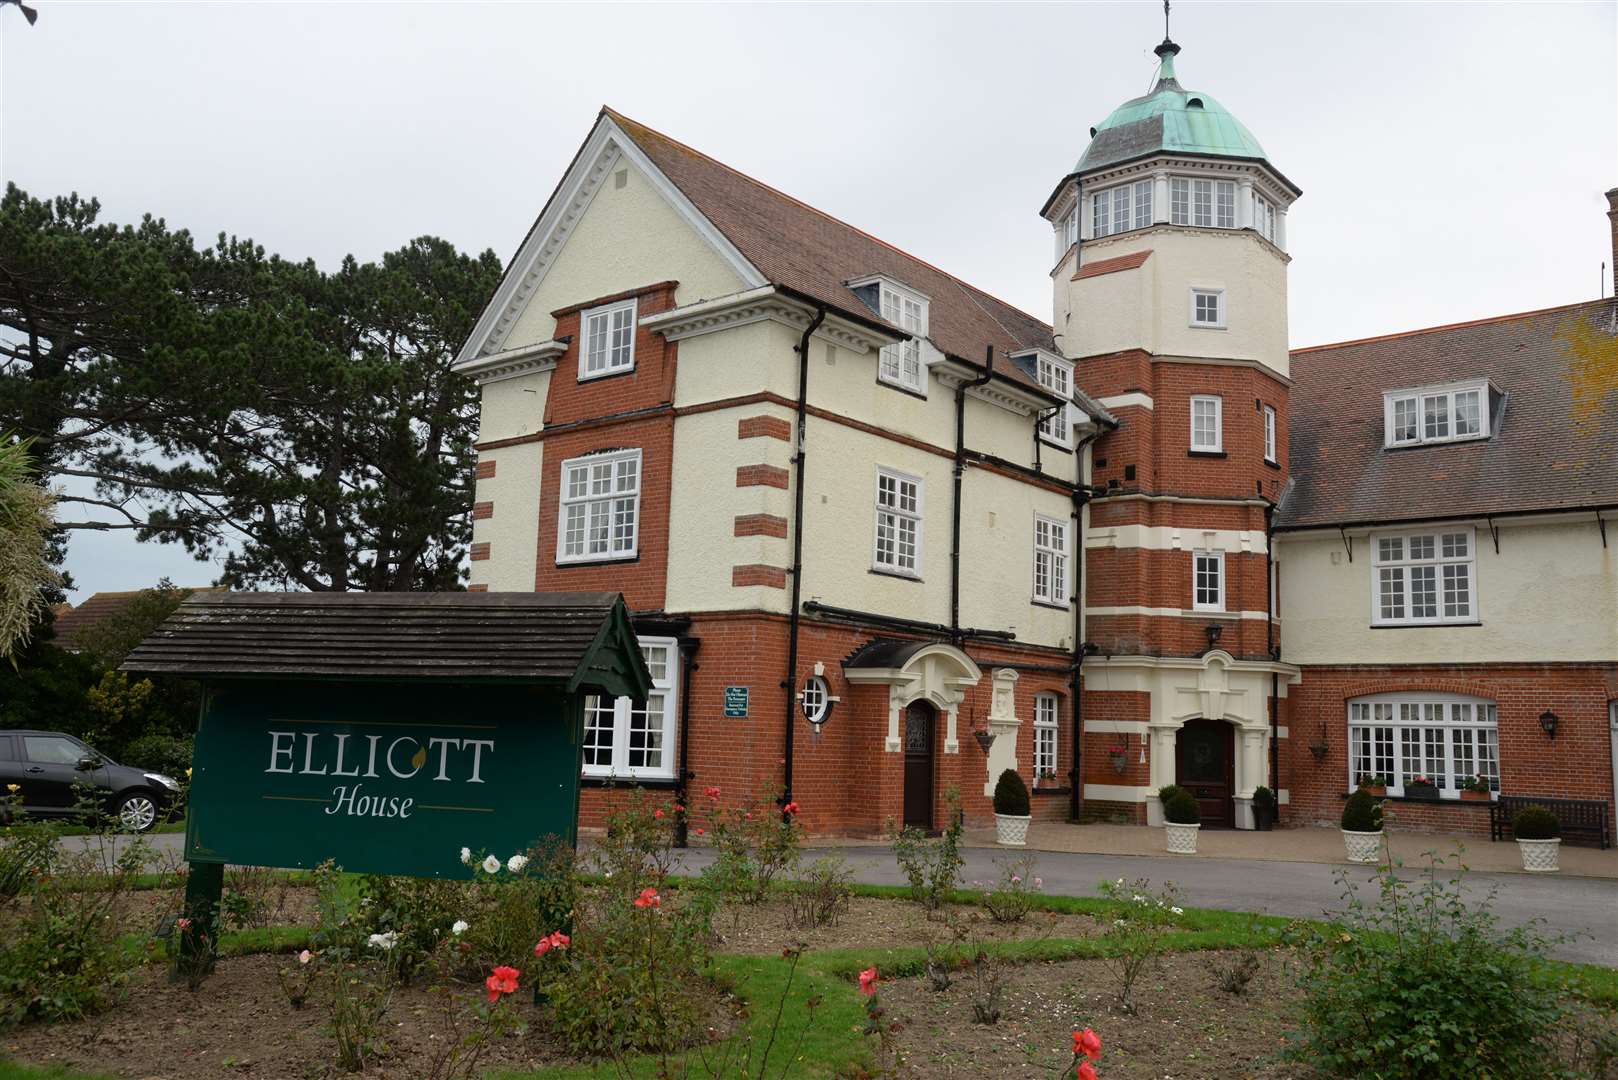 Bosses from Elliott House care home in Herne Bay have announced the site is set to close